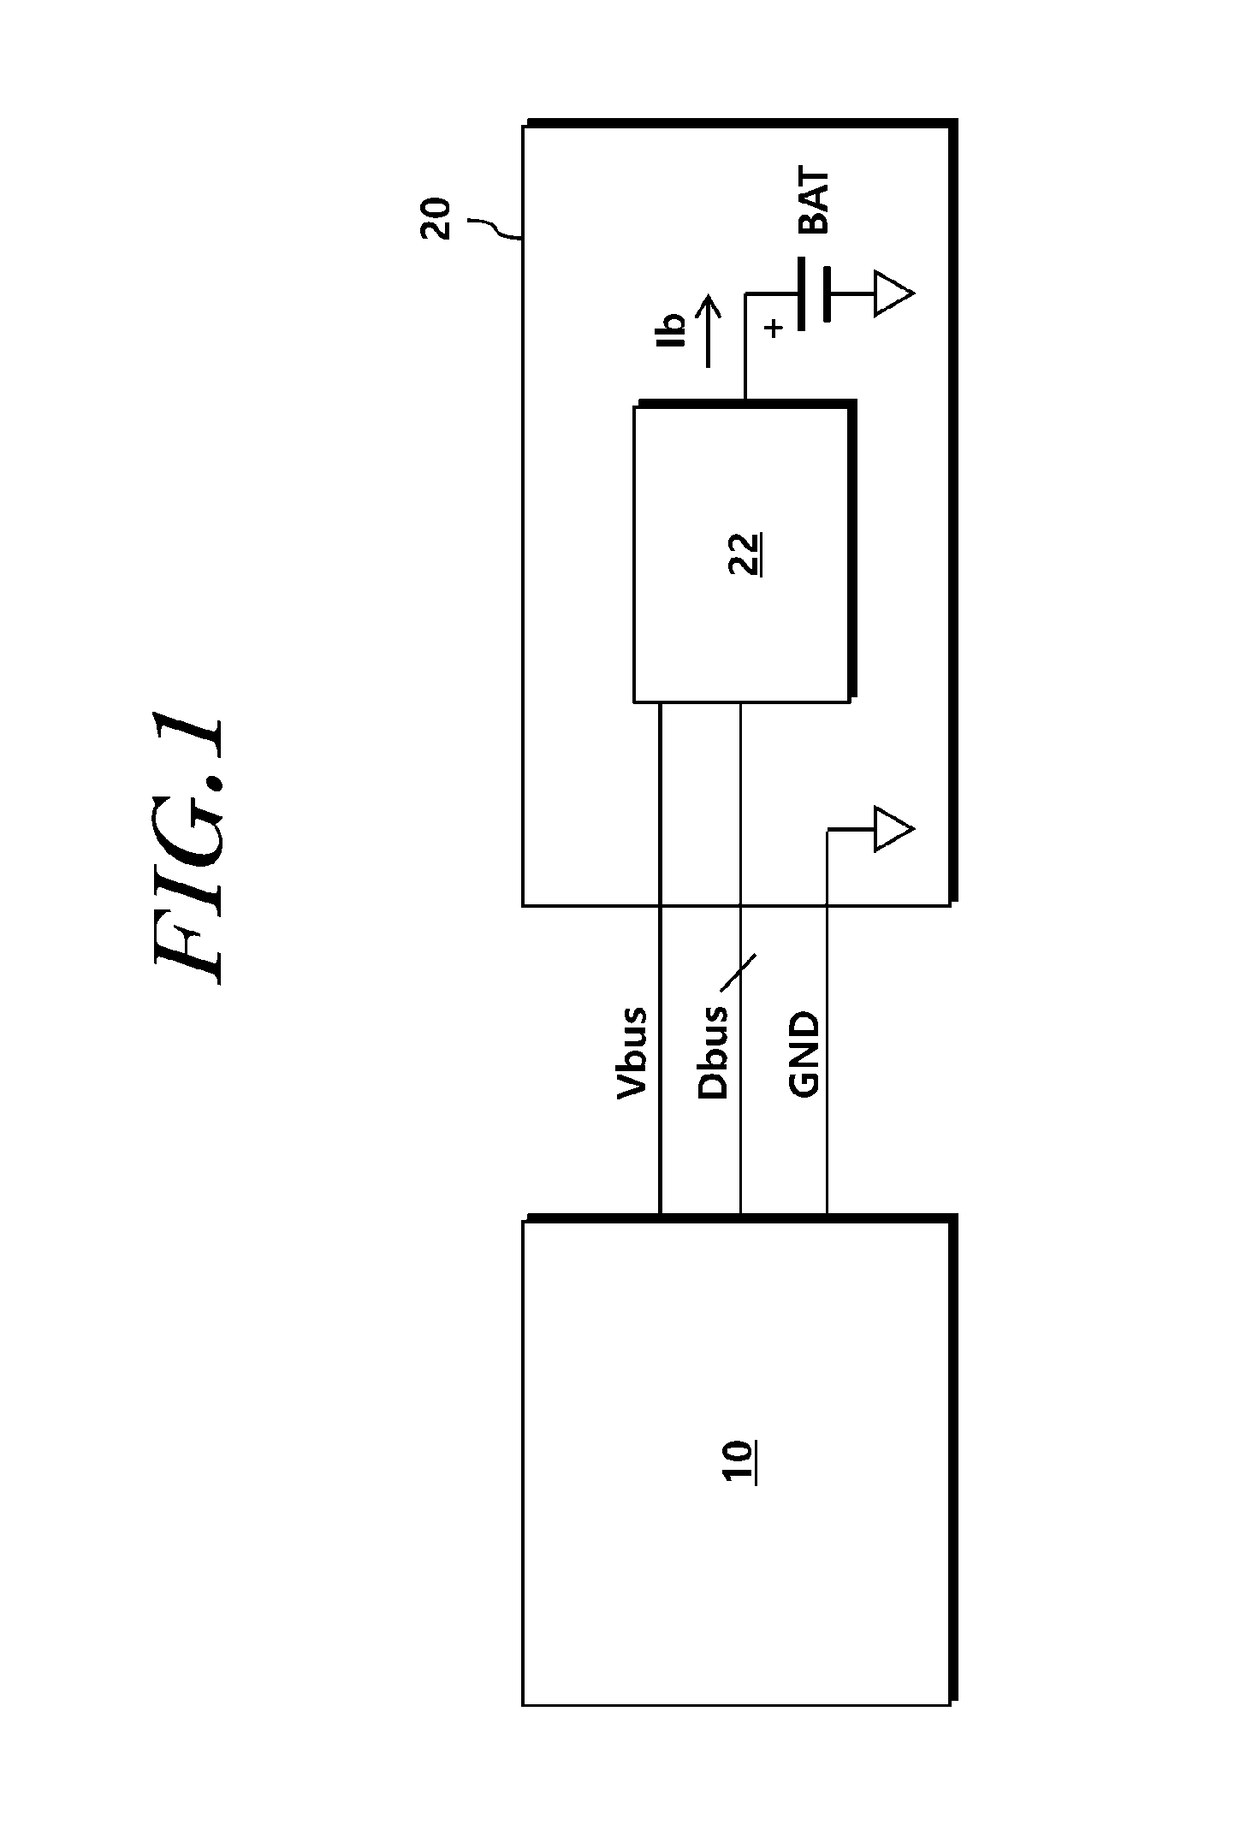 Multi-configurable switch mode charging system, charging circuit, and charging method